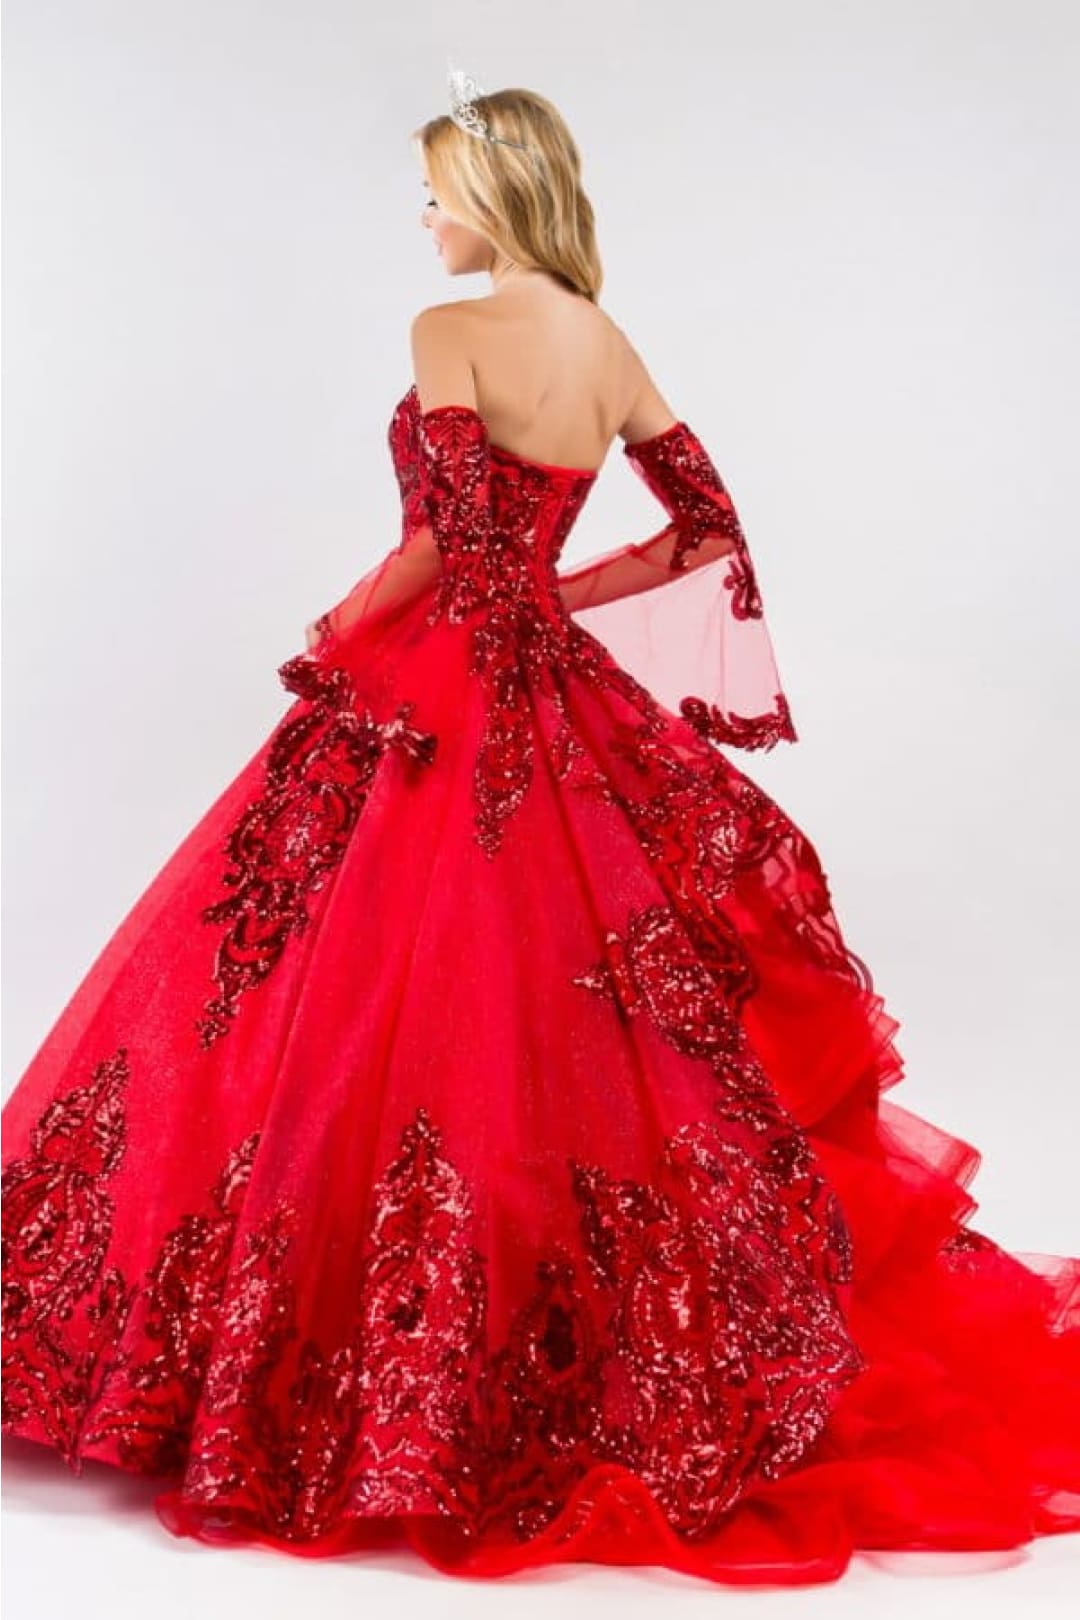 Elizabeth K GL1914 Detachable Sleeves Embellish Tiered Tail Ball Gown - Dress